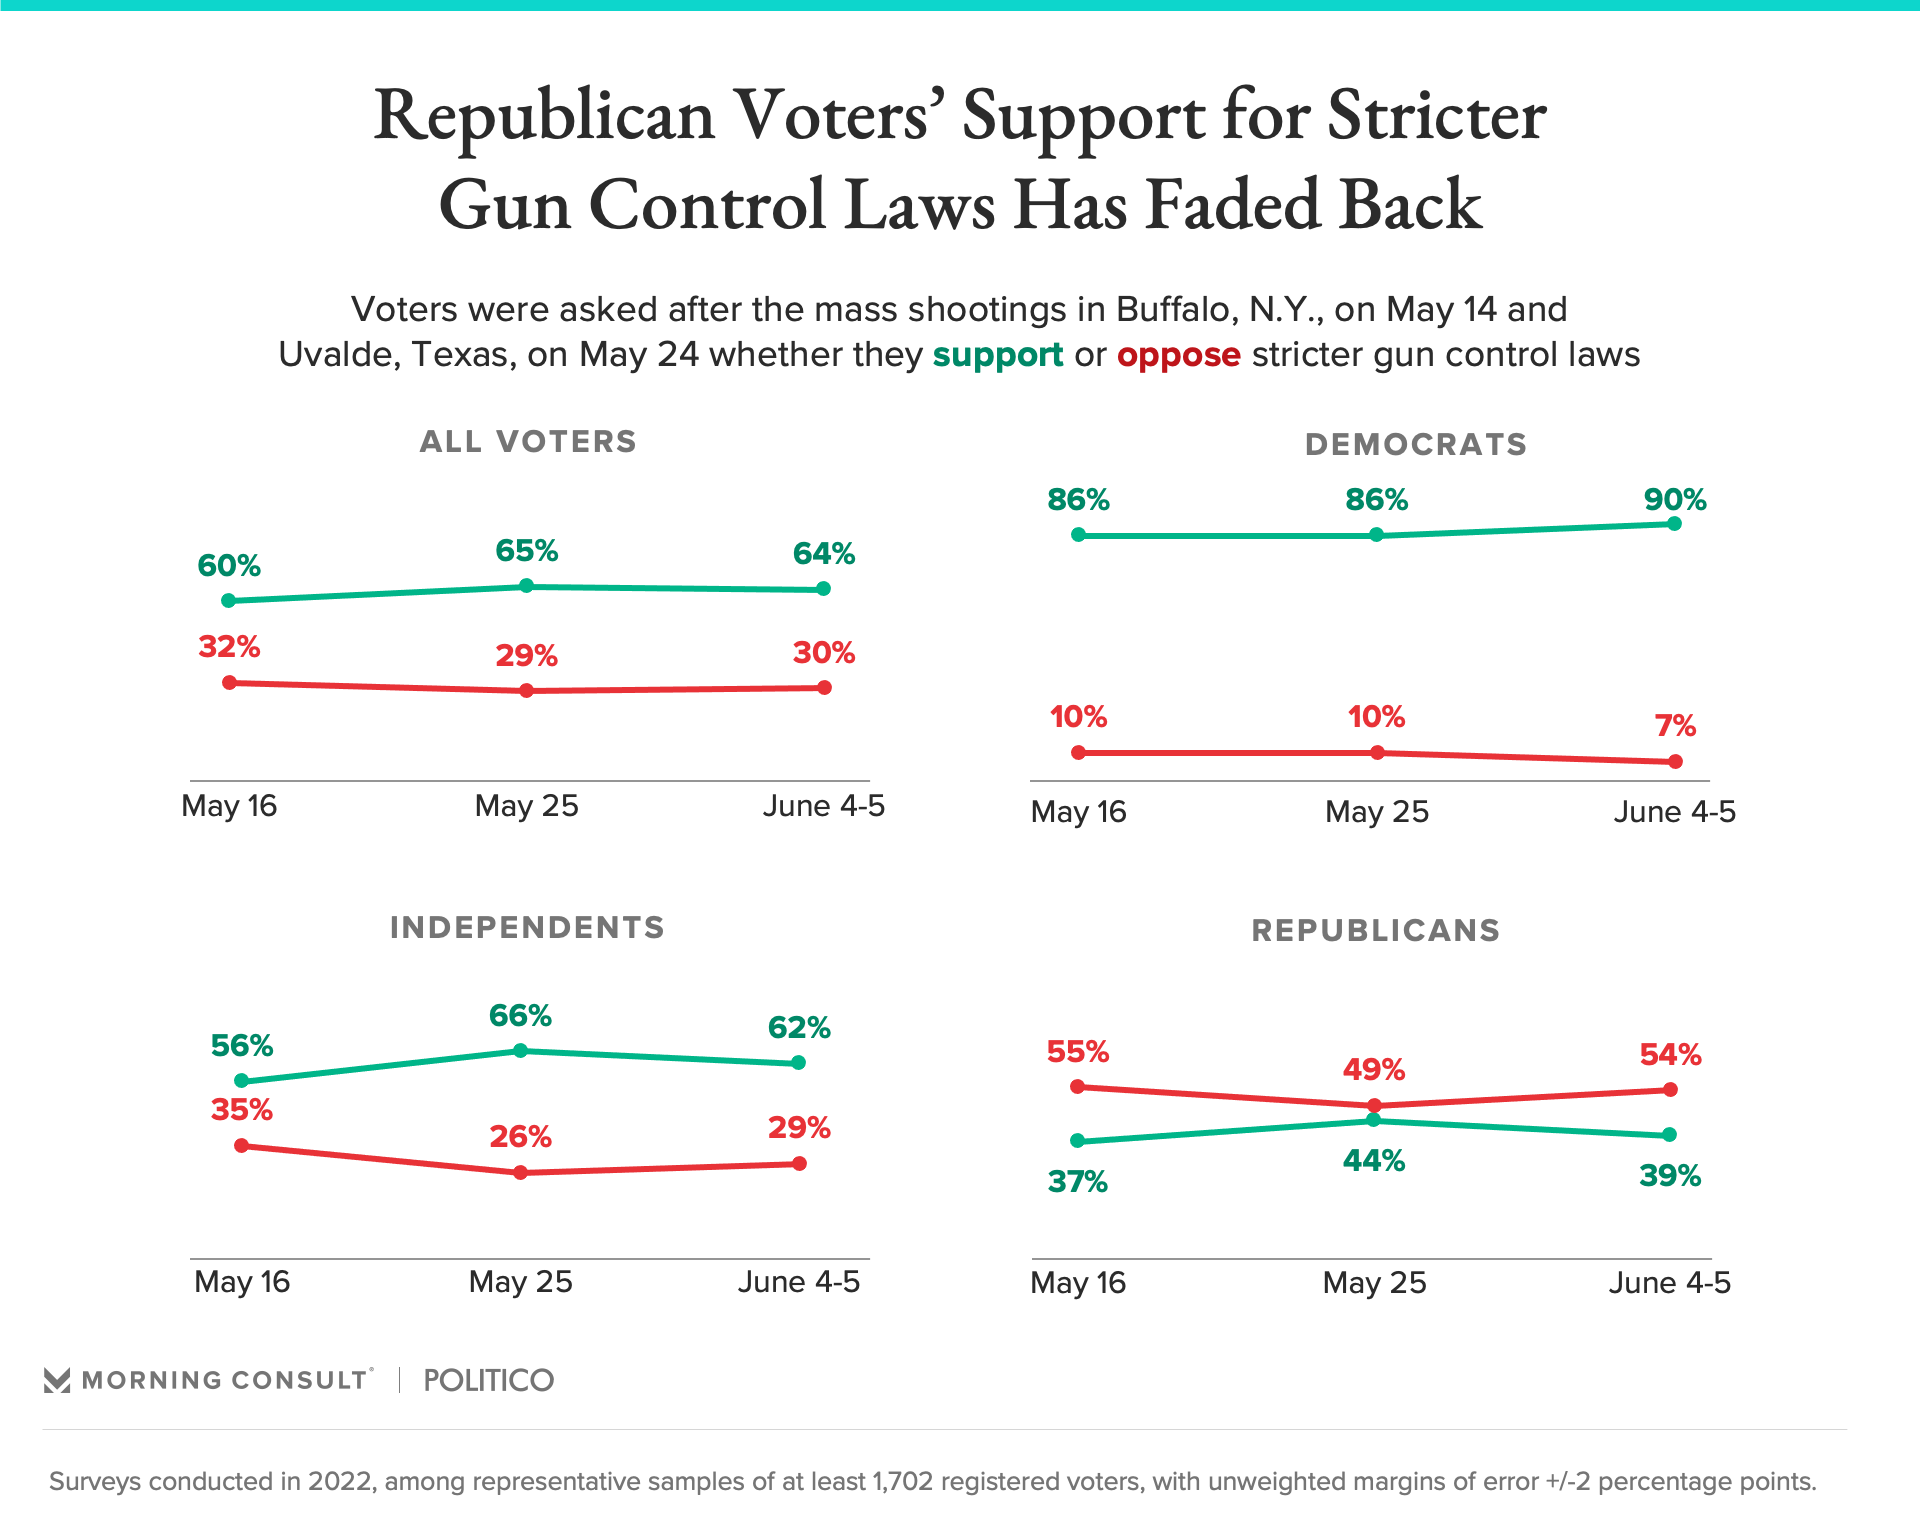 Graphic showing Republican support for Gun Control Laws has faded